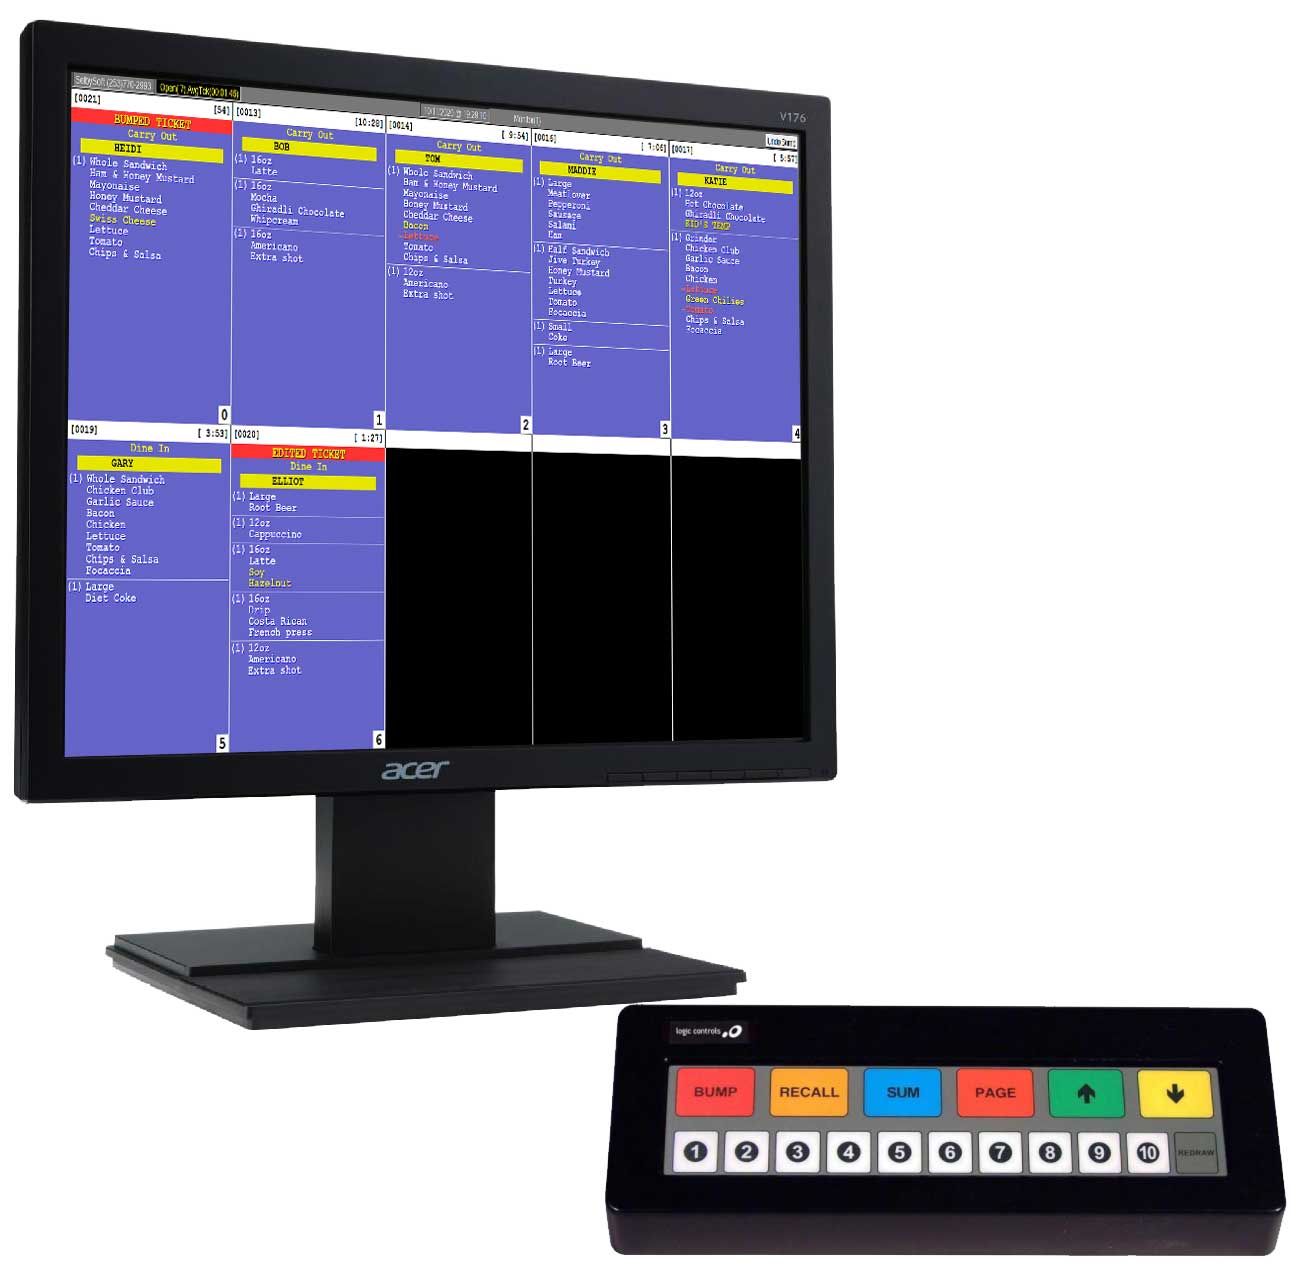 Kitchen Display Monitor with SelbySoft Running